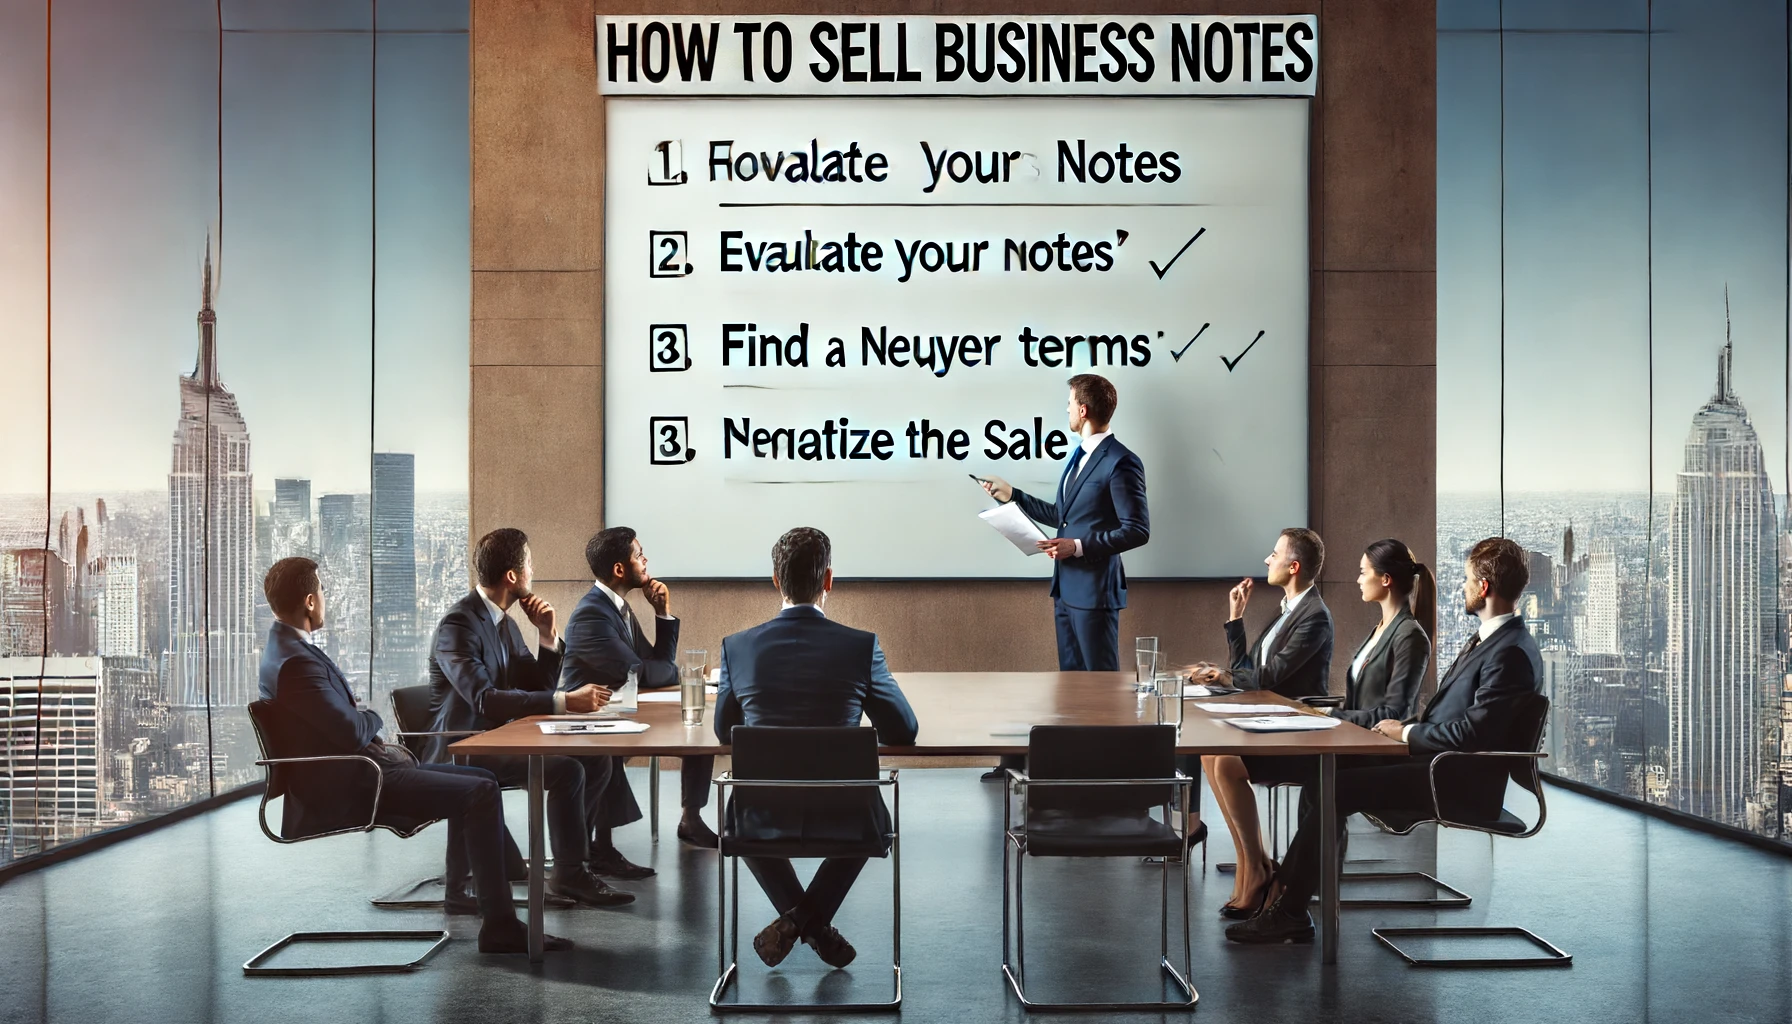 How to Sell Business Notes